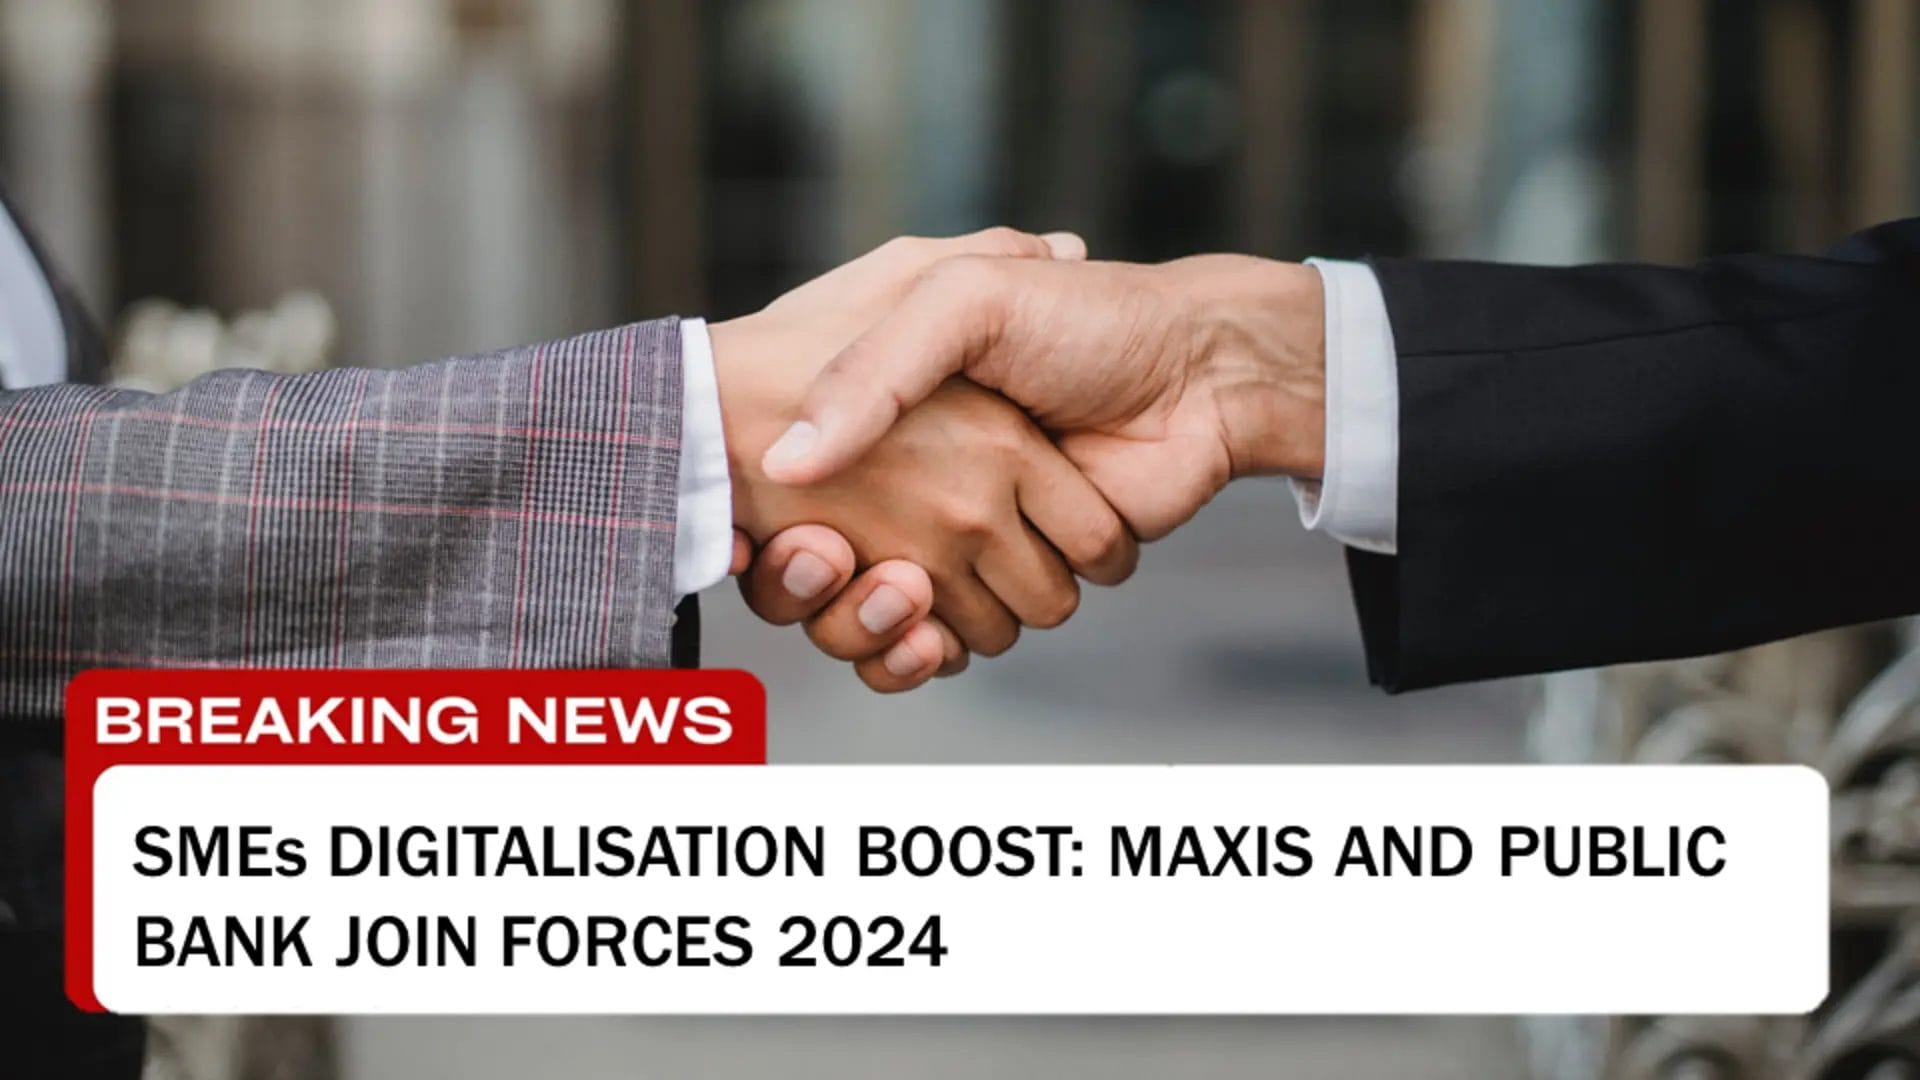 Breaking News: SMEs Digitalisation Boost: Maxis And Public Bank Join Forces 2024 Article by BigDomain